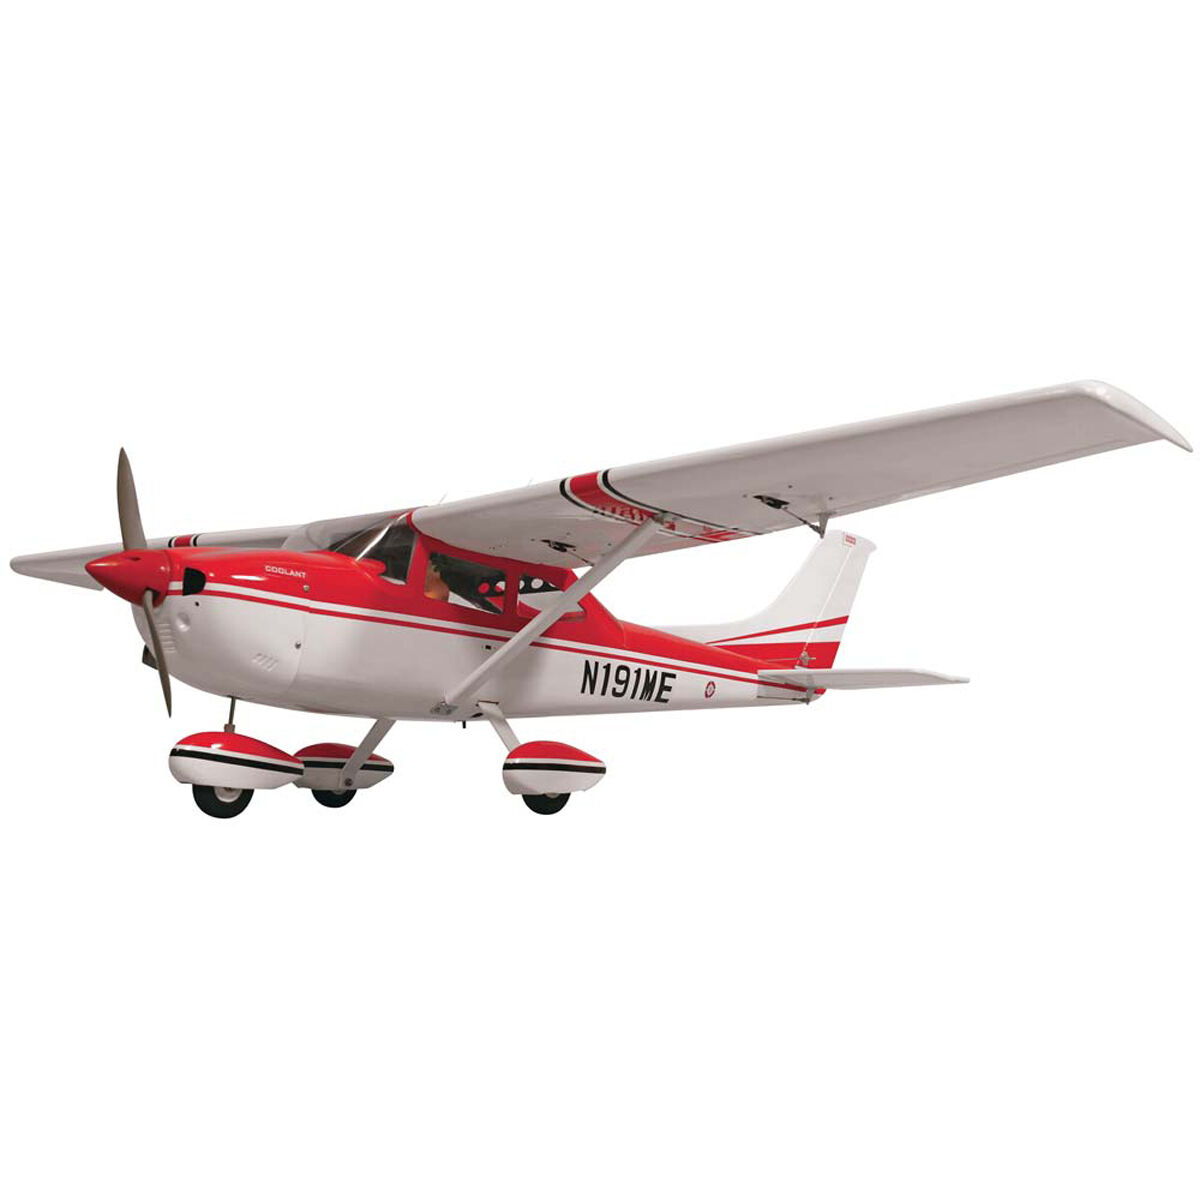 Details about   Cessna 182 Sky Service Solid Mahogany Wood Handcrafted Display Airplane Model